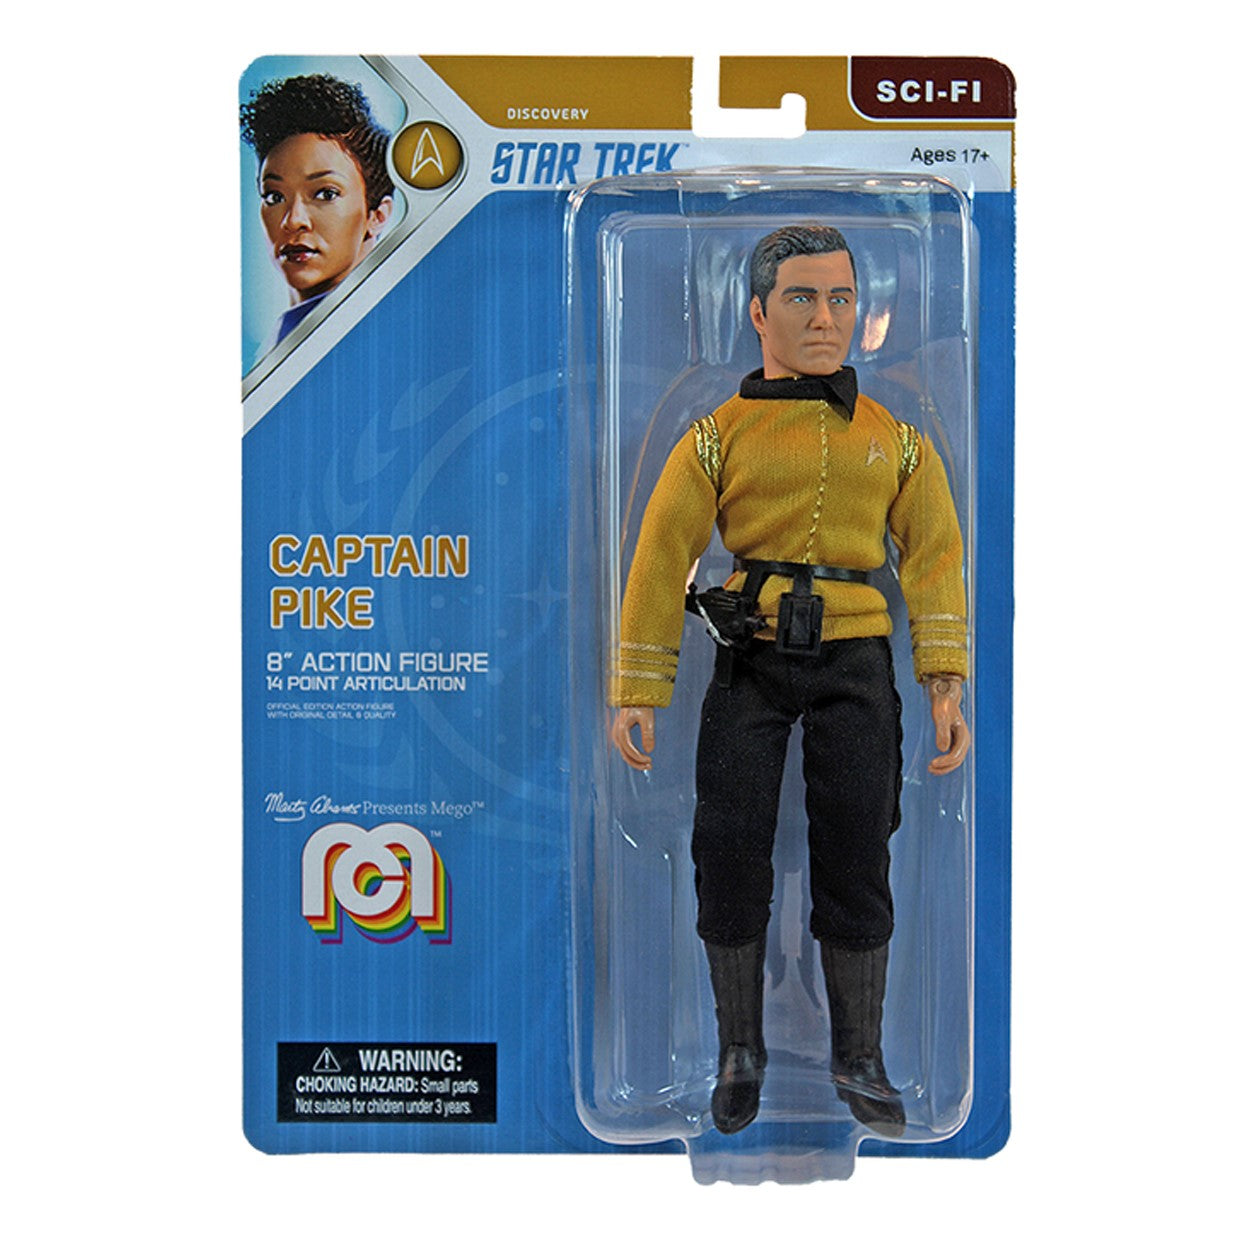 Star Trek Discovery Captain Pike 8" Action Figure - Mego